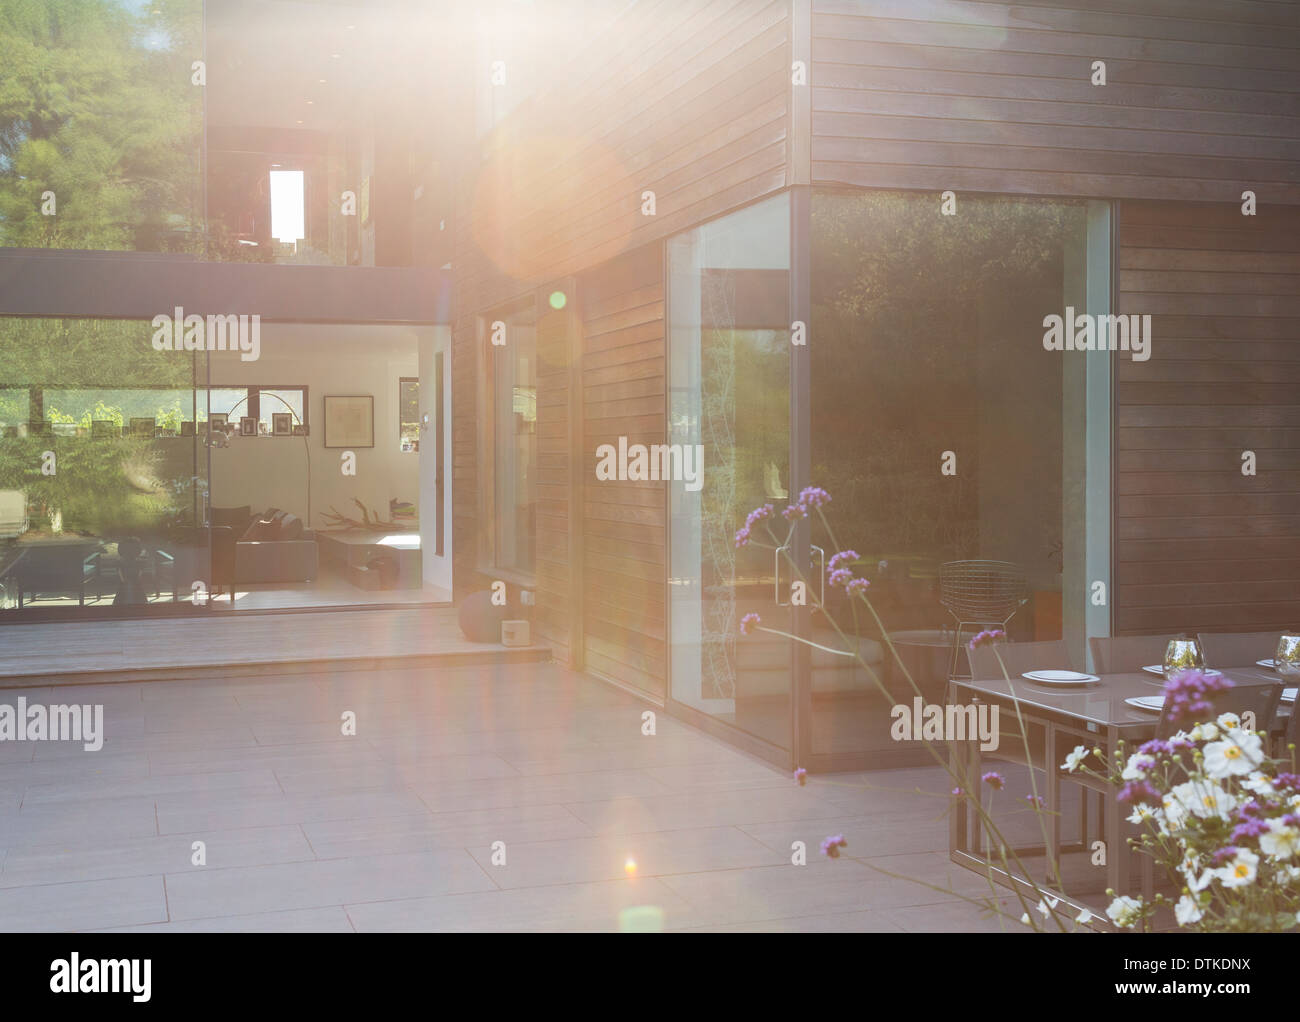 Courtyard and modern house Stock Photo